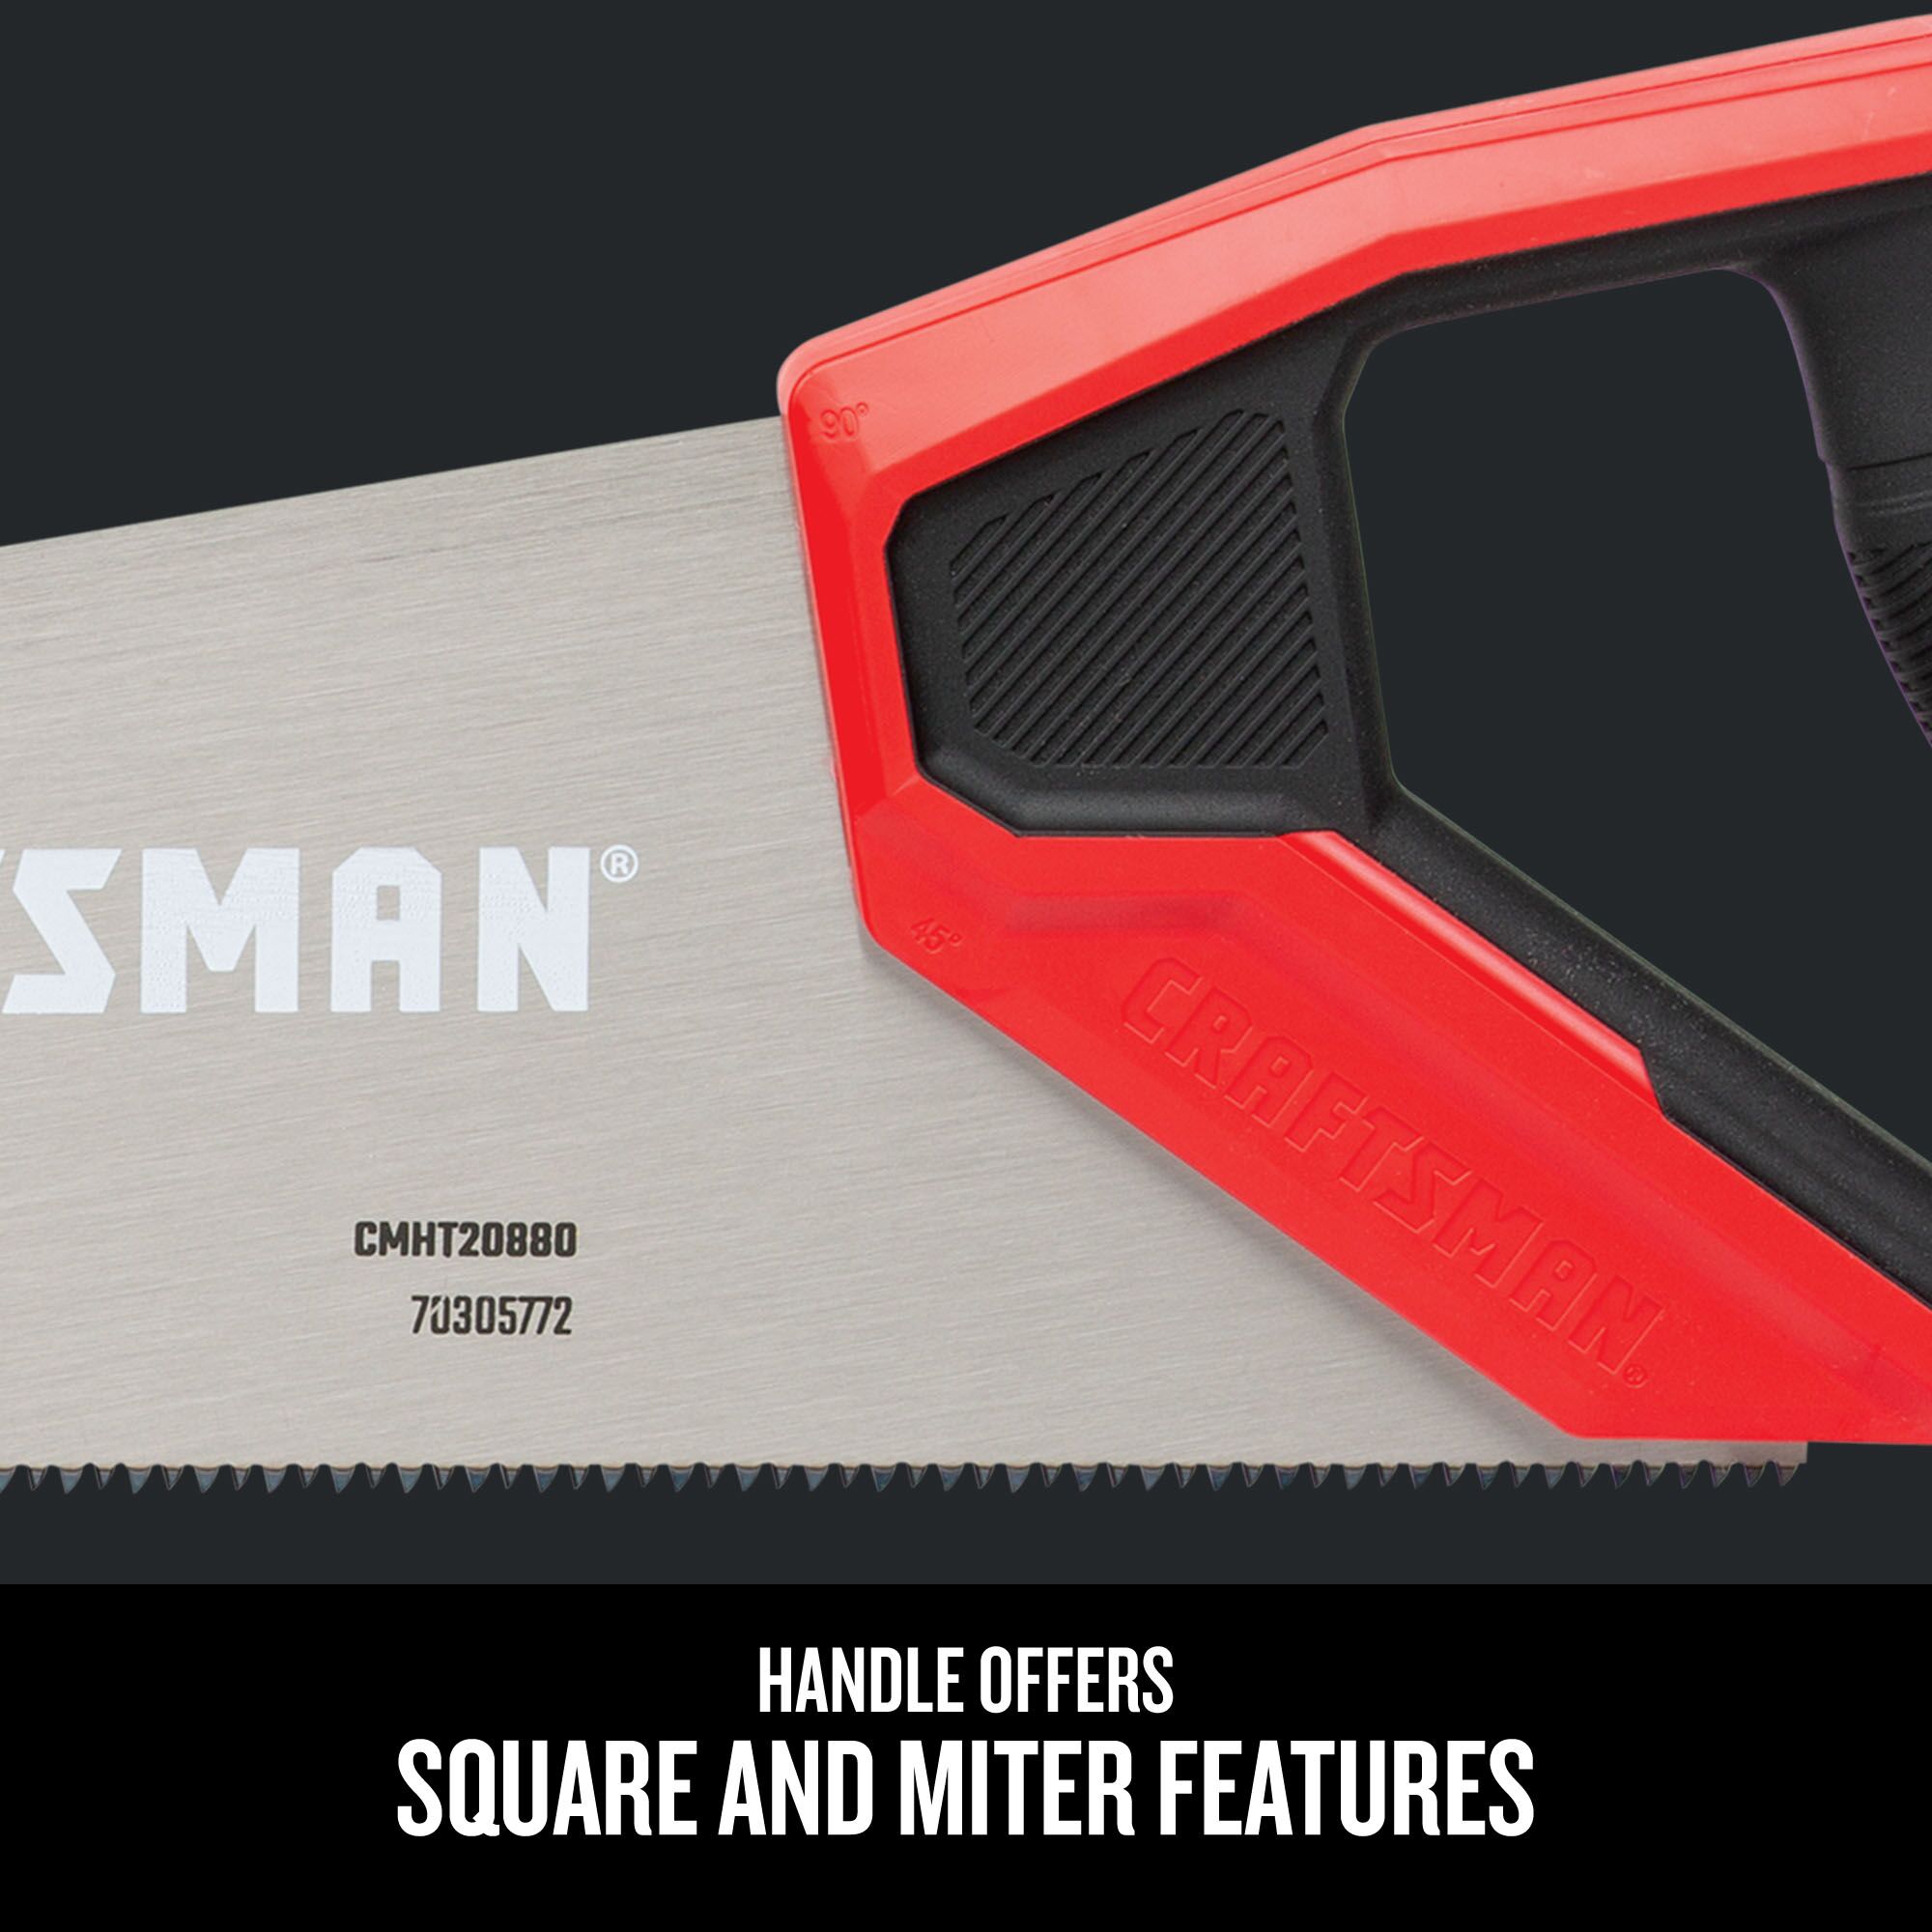 Graphic of CRAFTSMAN Handsaw highlighting product features